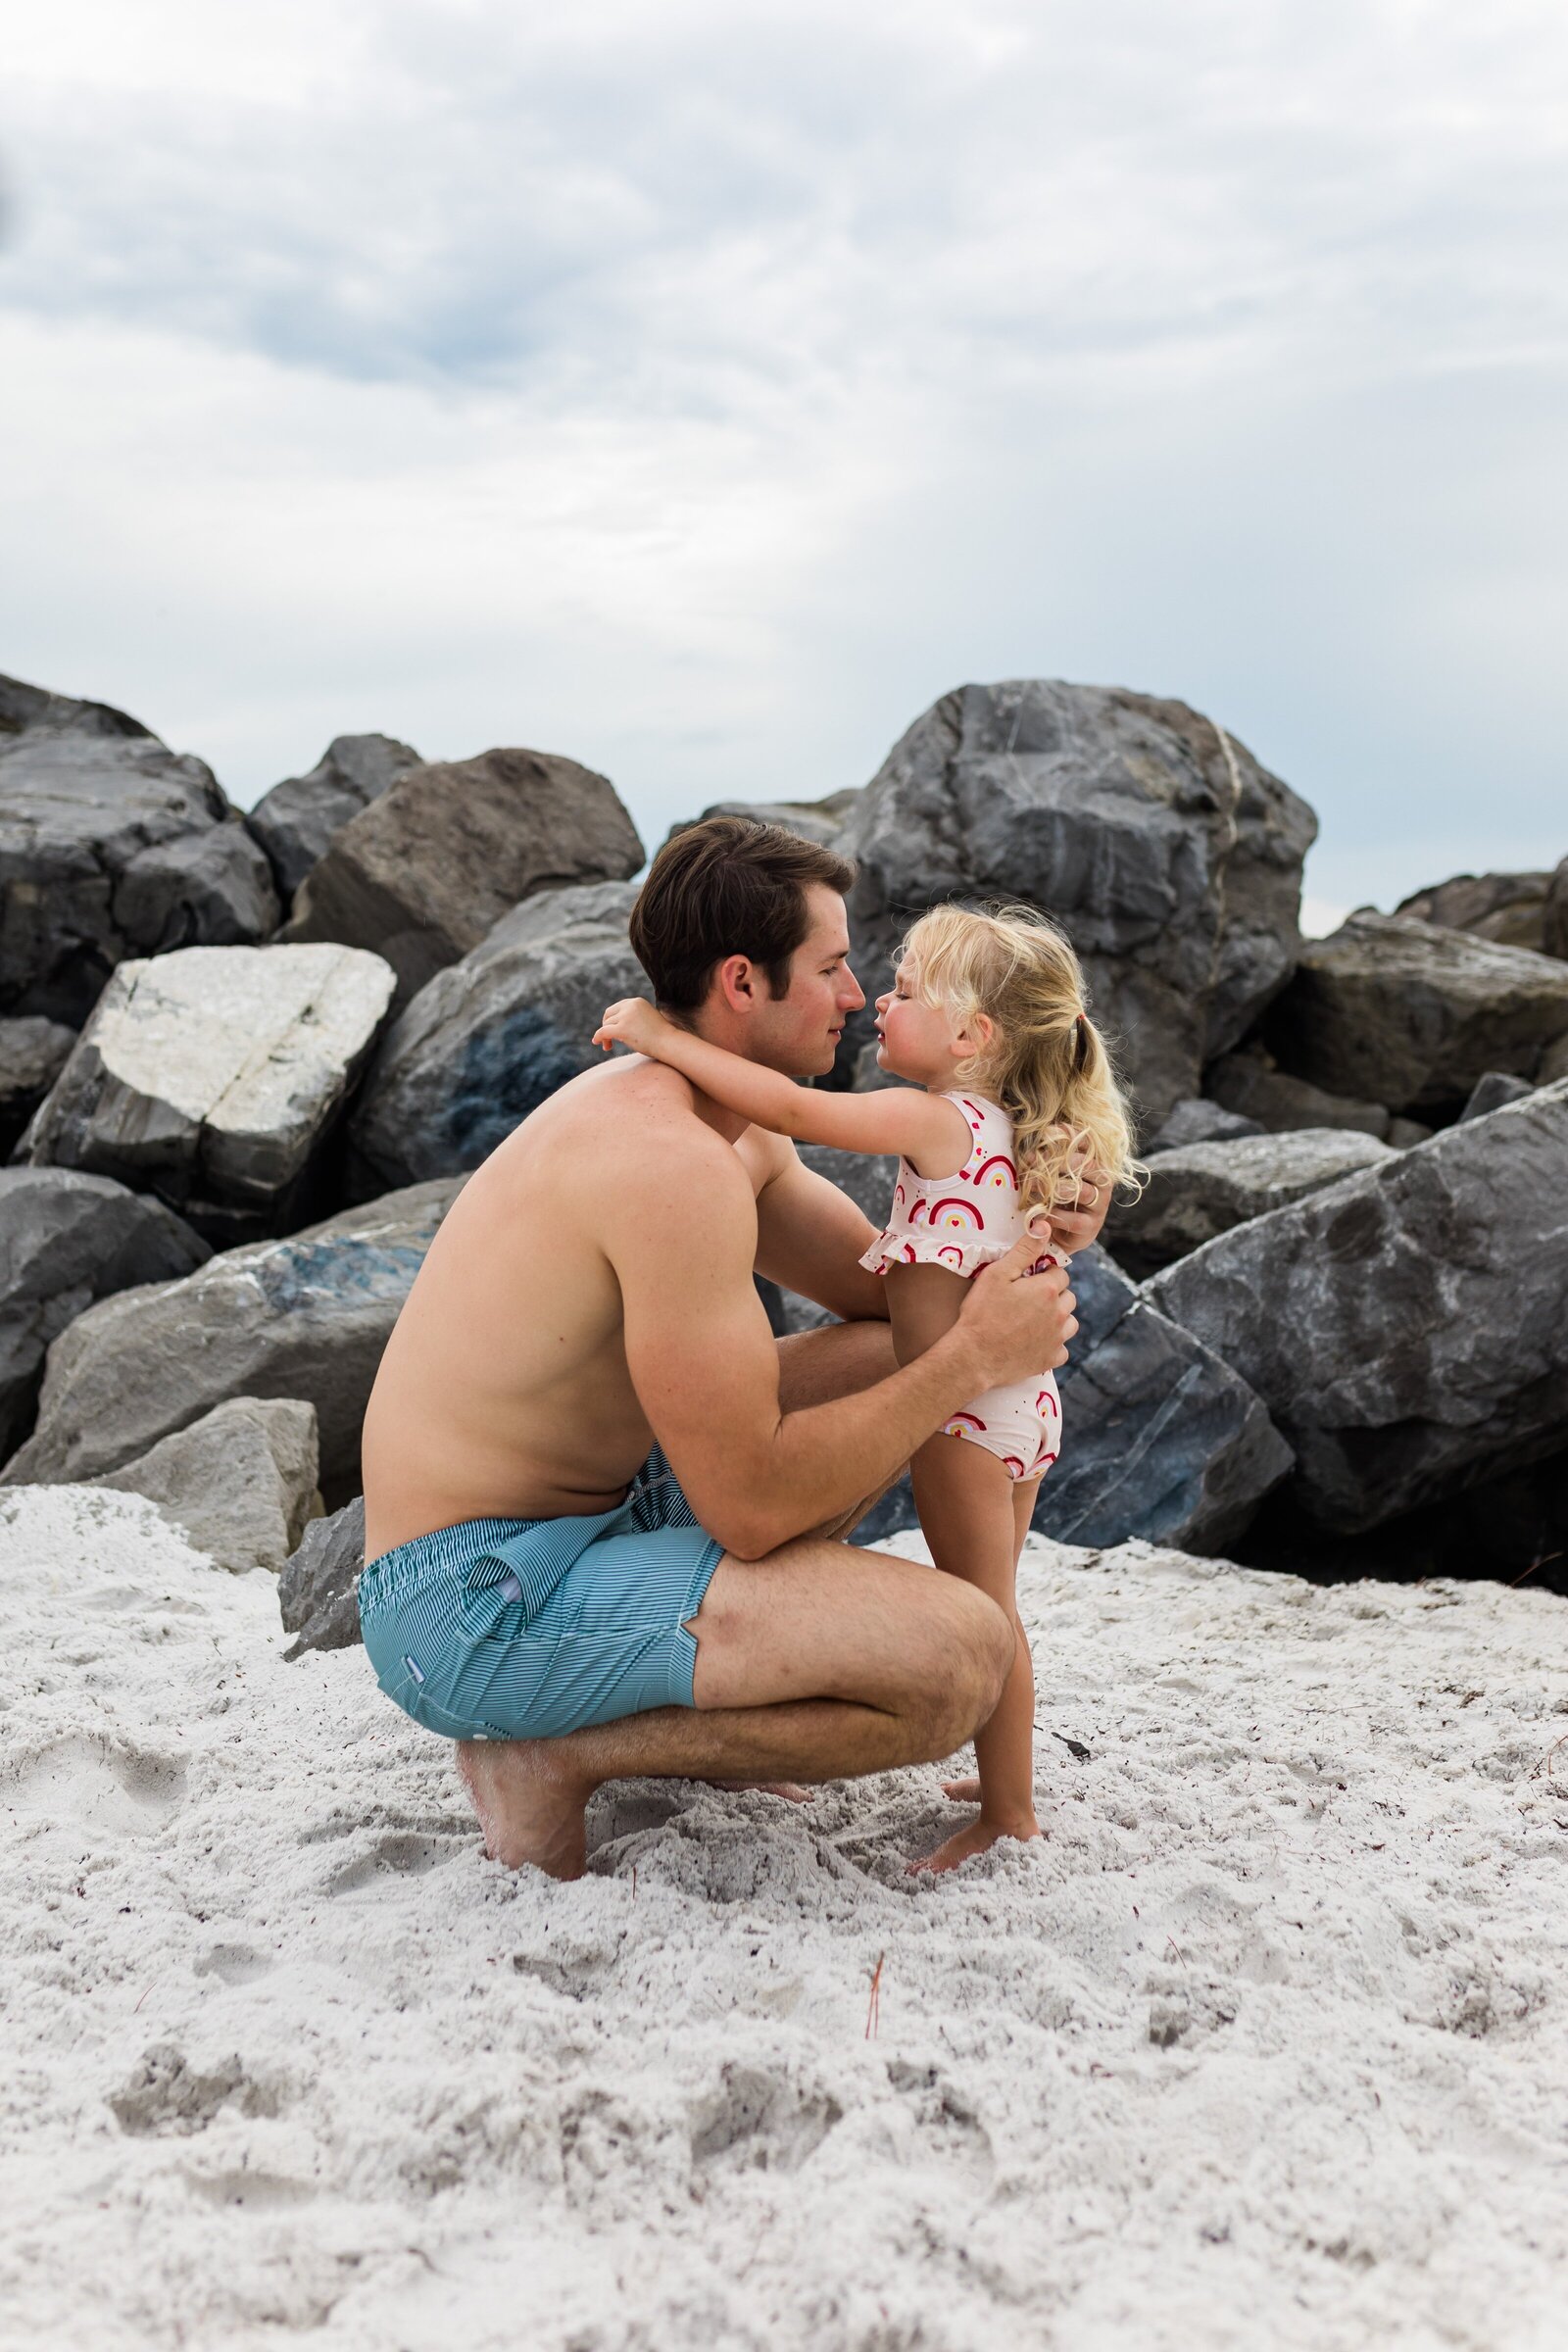 Pensacola Beach  vacation family photo session . Family playing in the sand.